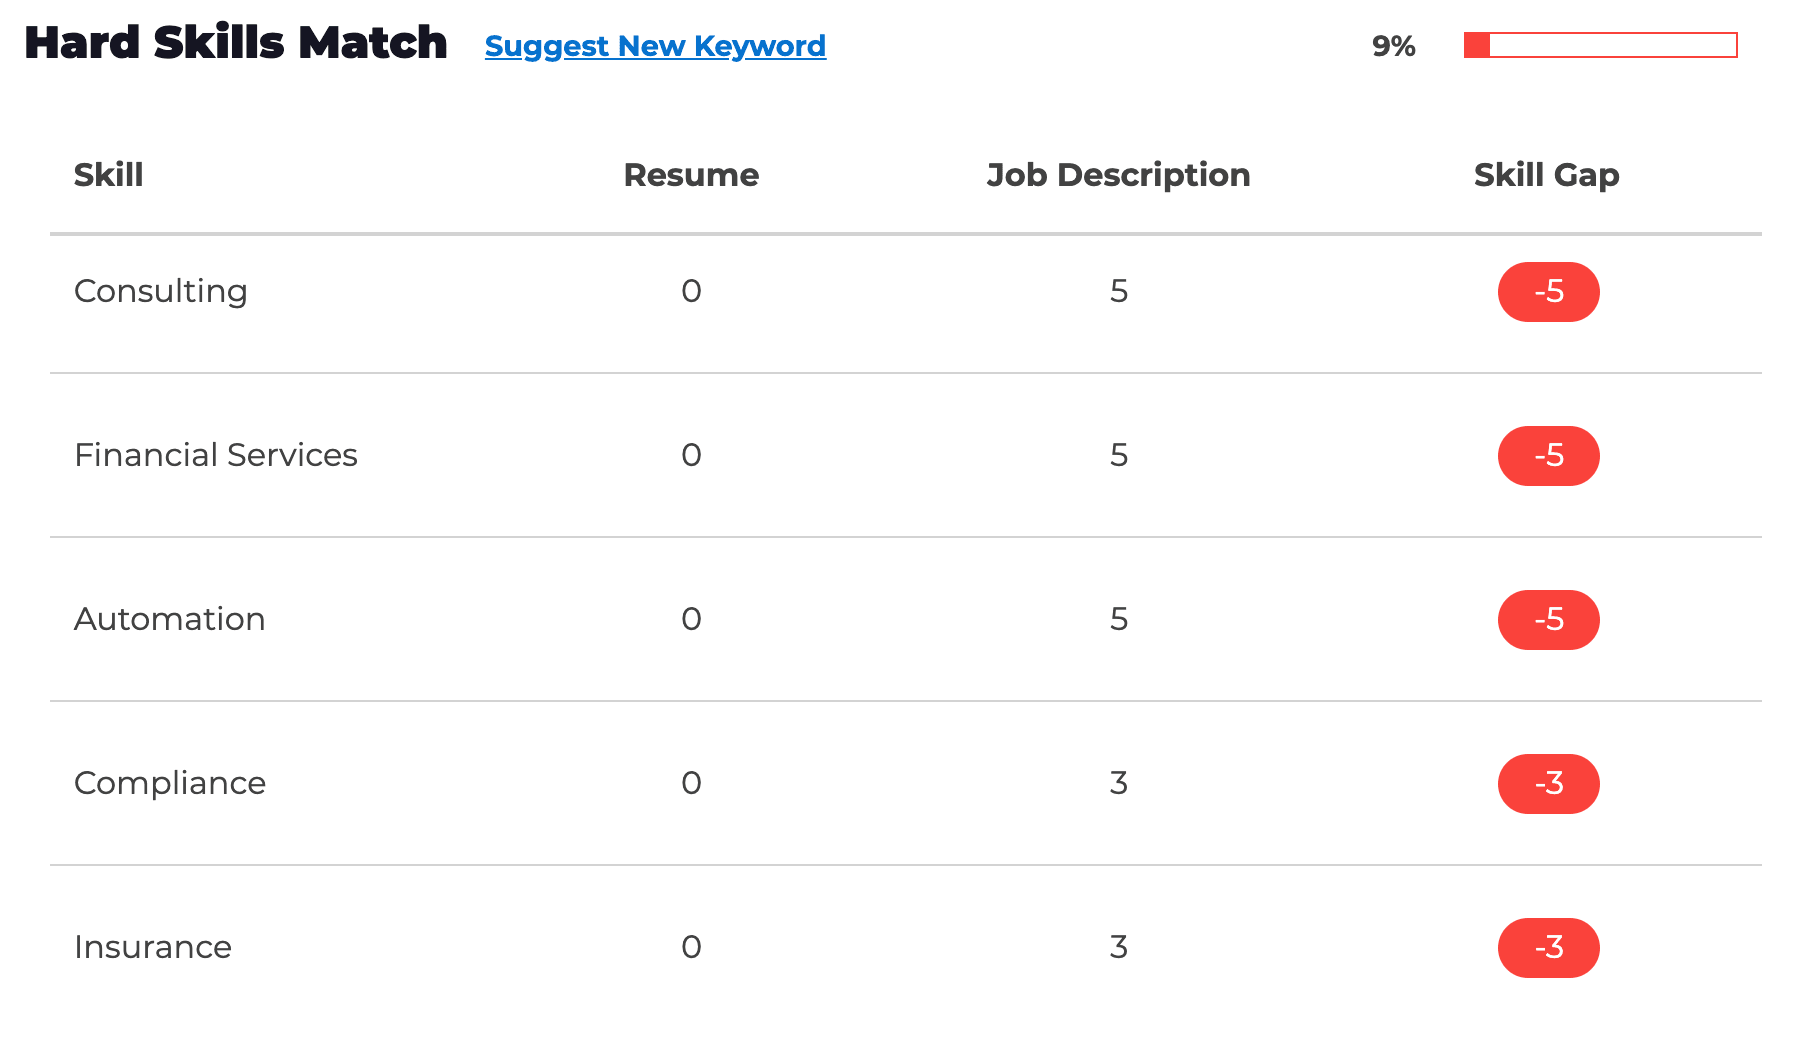 ResyMatch.ioResults For Interview Hard Skills And Soft Skills